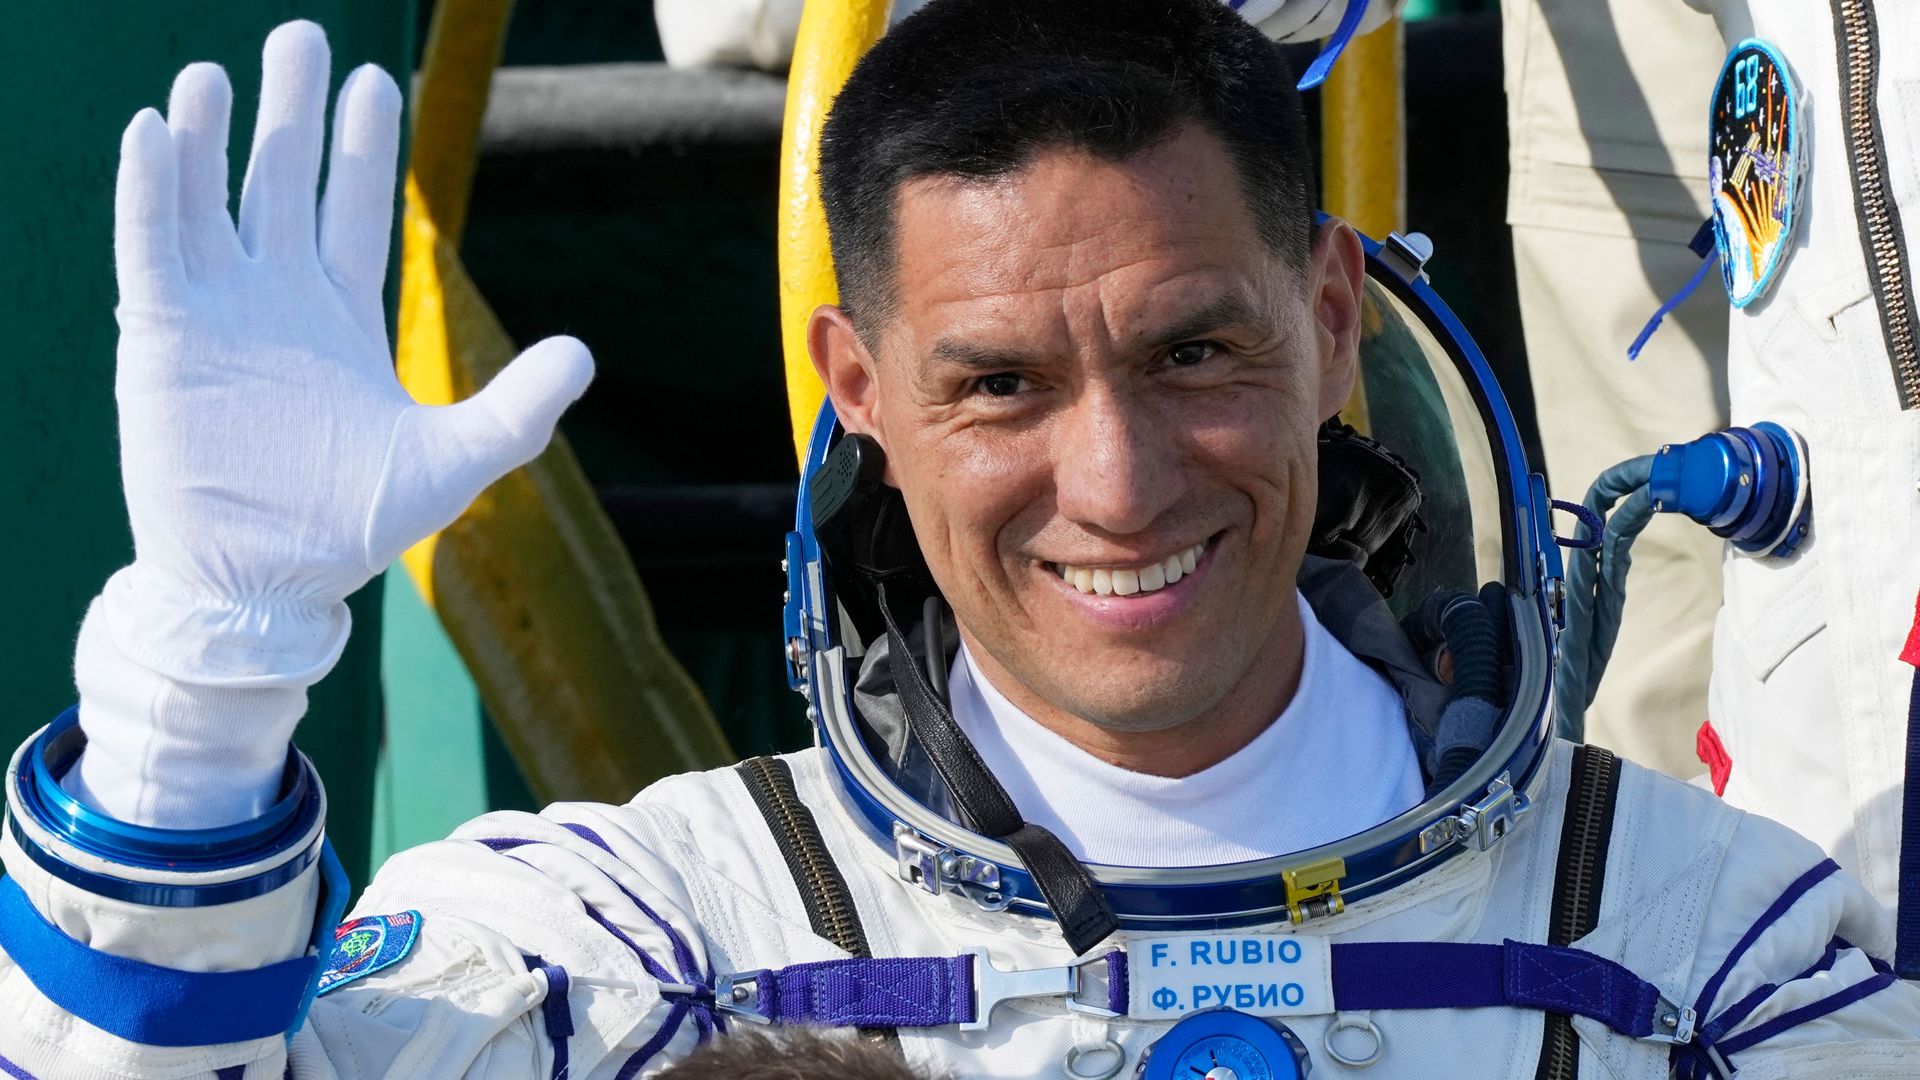 NASA astronaut Frank Rubio waves to a crowd before boarding a spacecraft